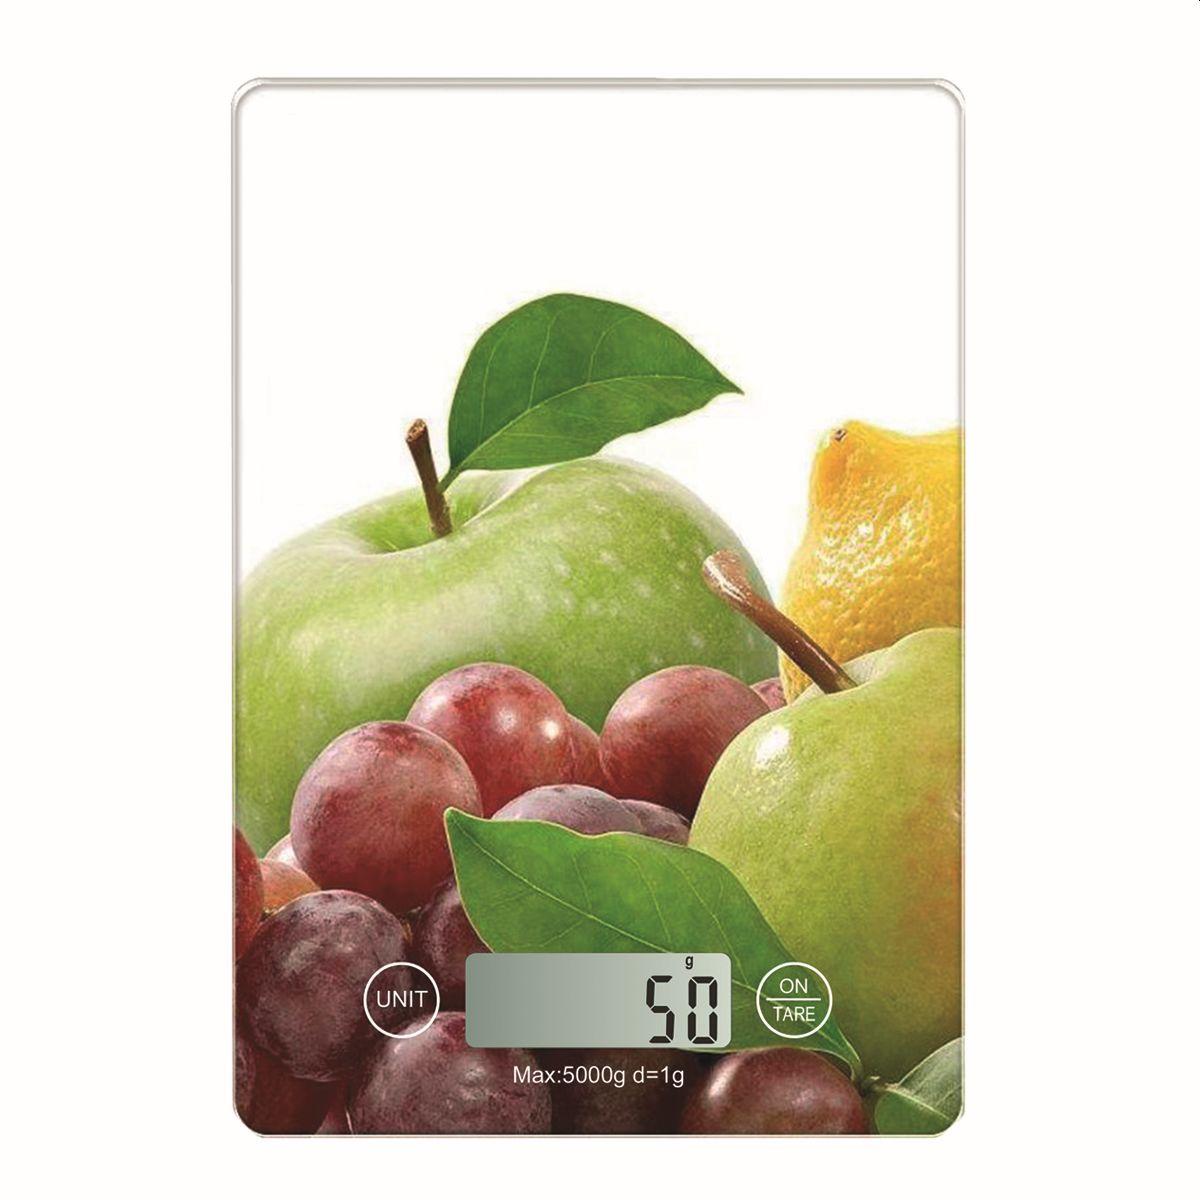 Omega kitchen scale fruits lcd display 5 kg capacity [45504]